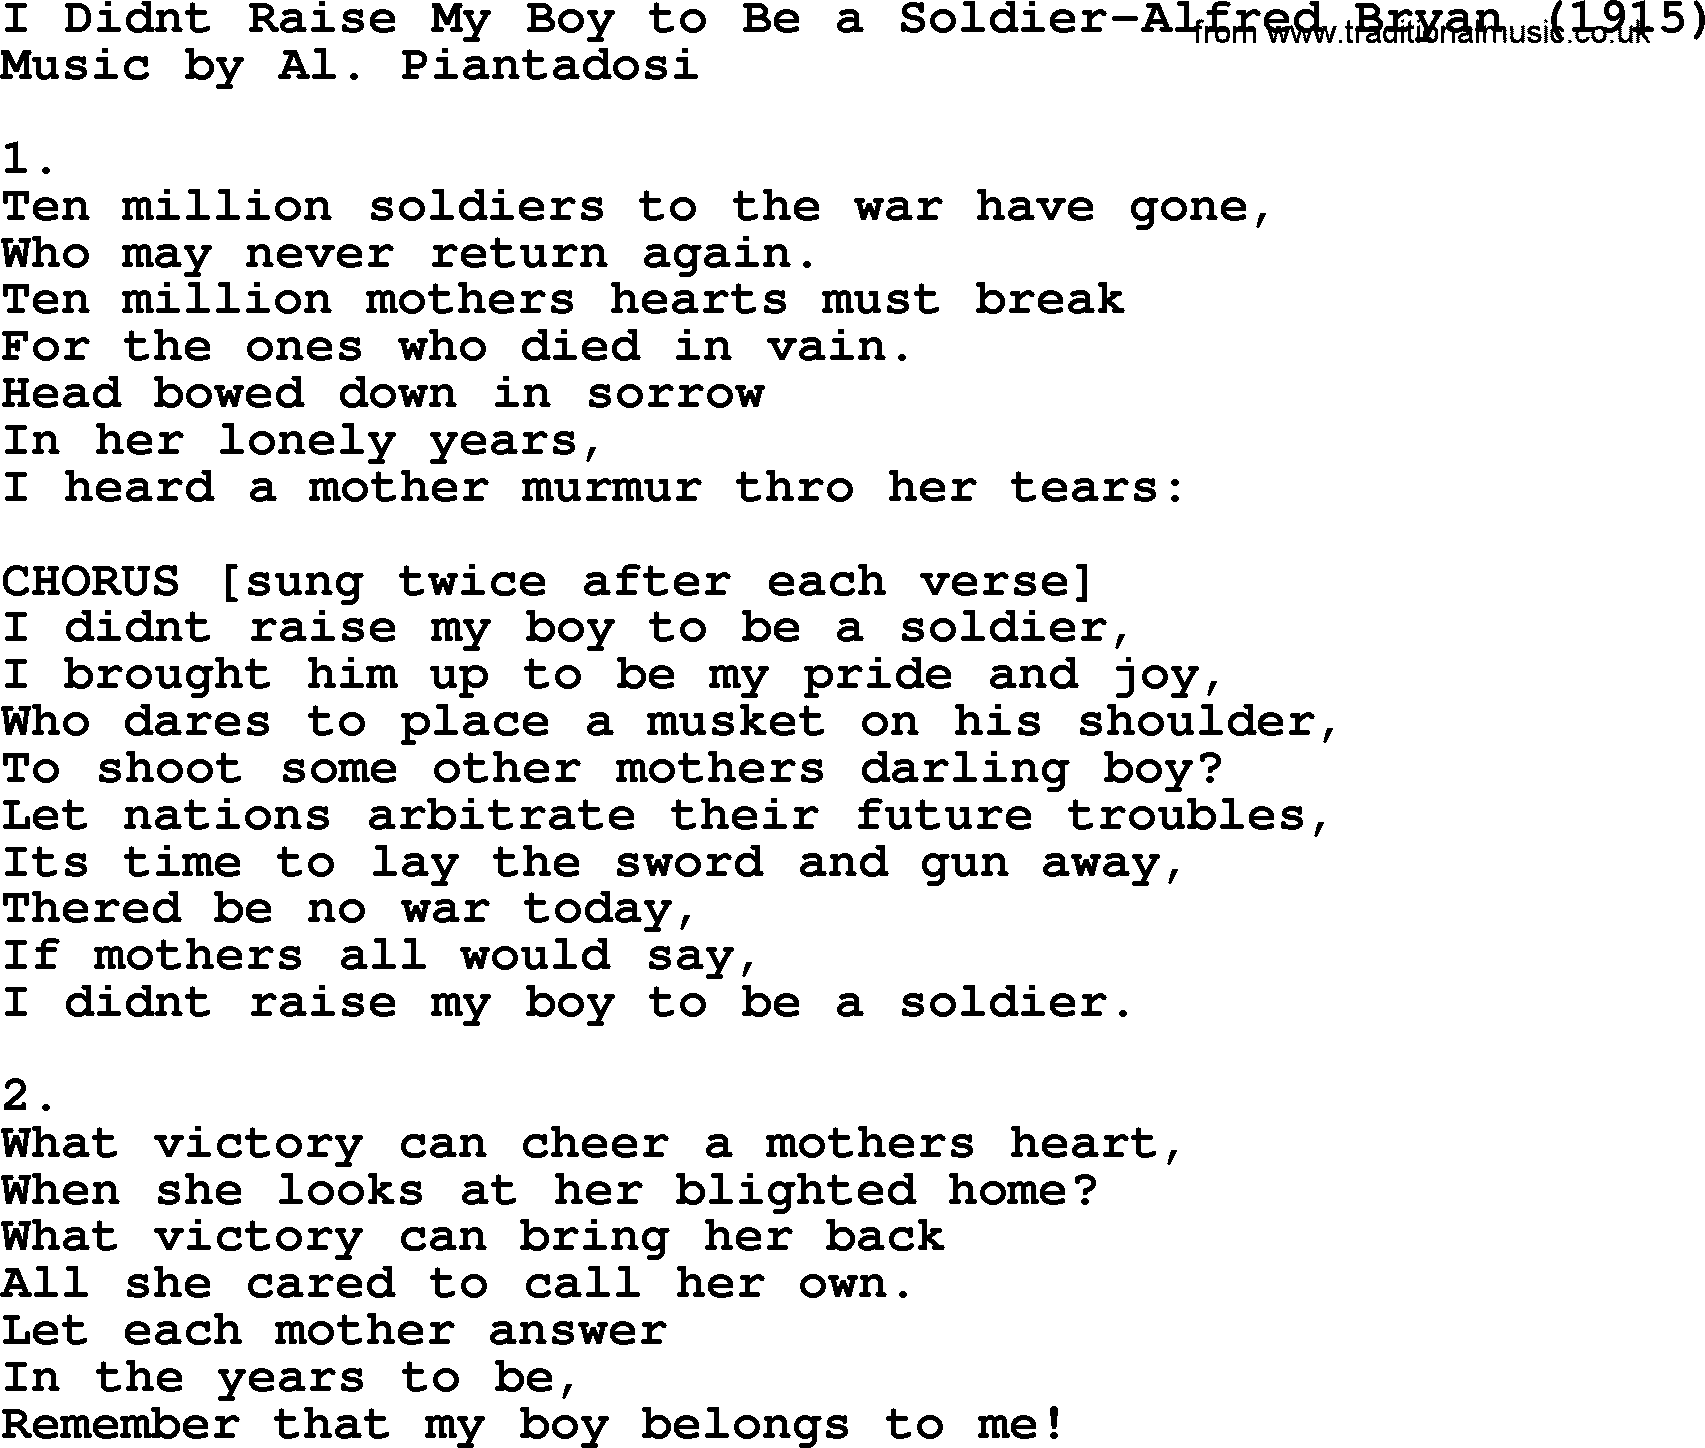 World War(WW1) One Song: I Didn’t Raise My Boy To Be A Soldier-Alfred Bryan 1915, lyrics and PDF